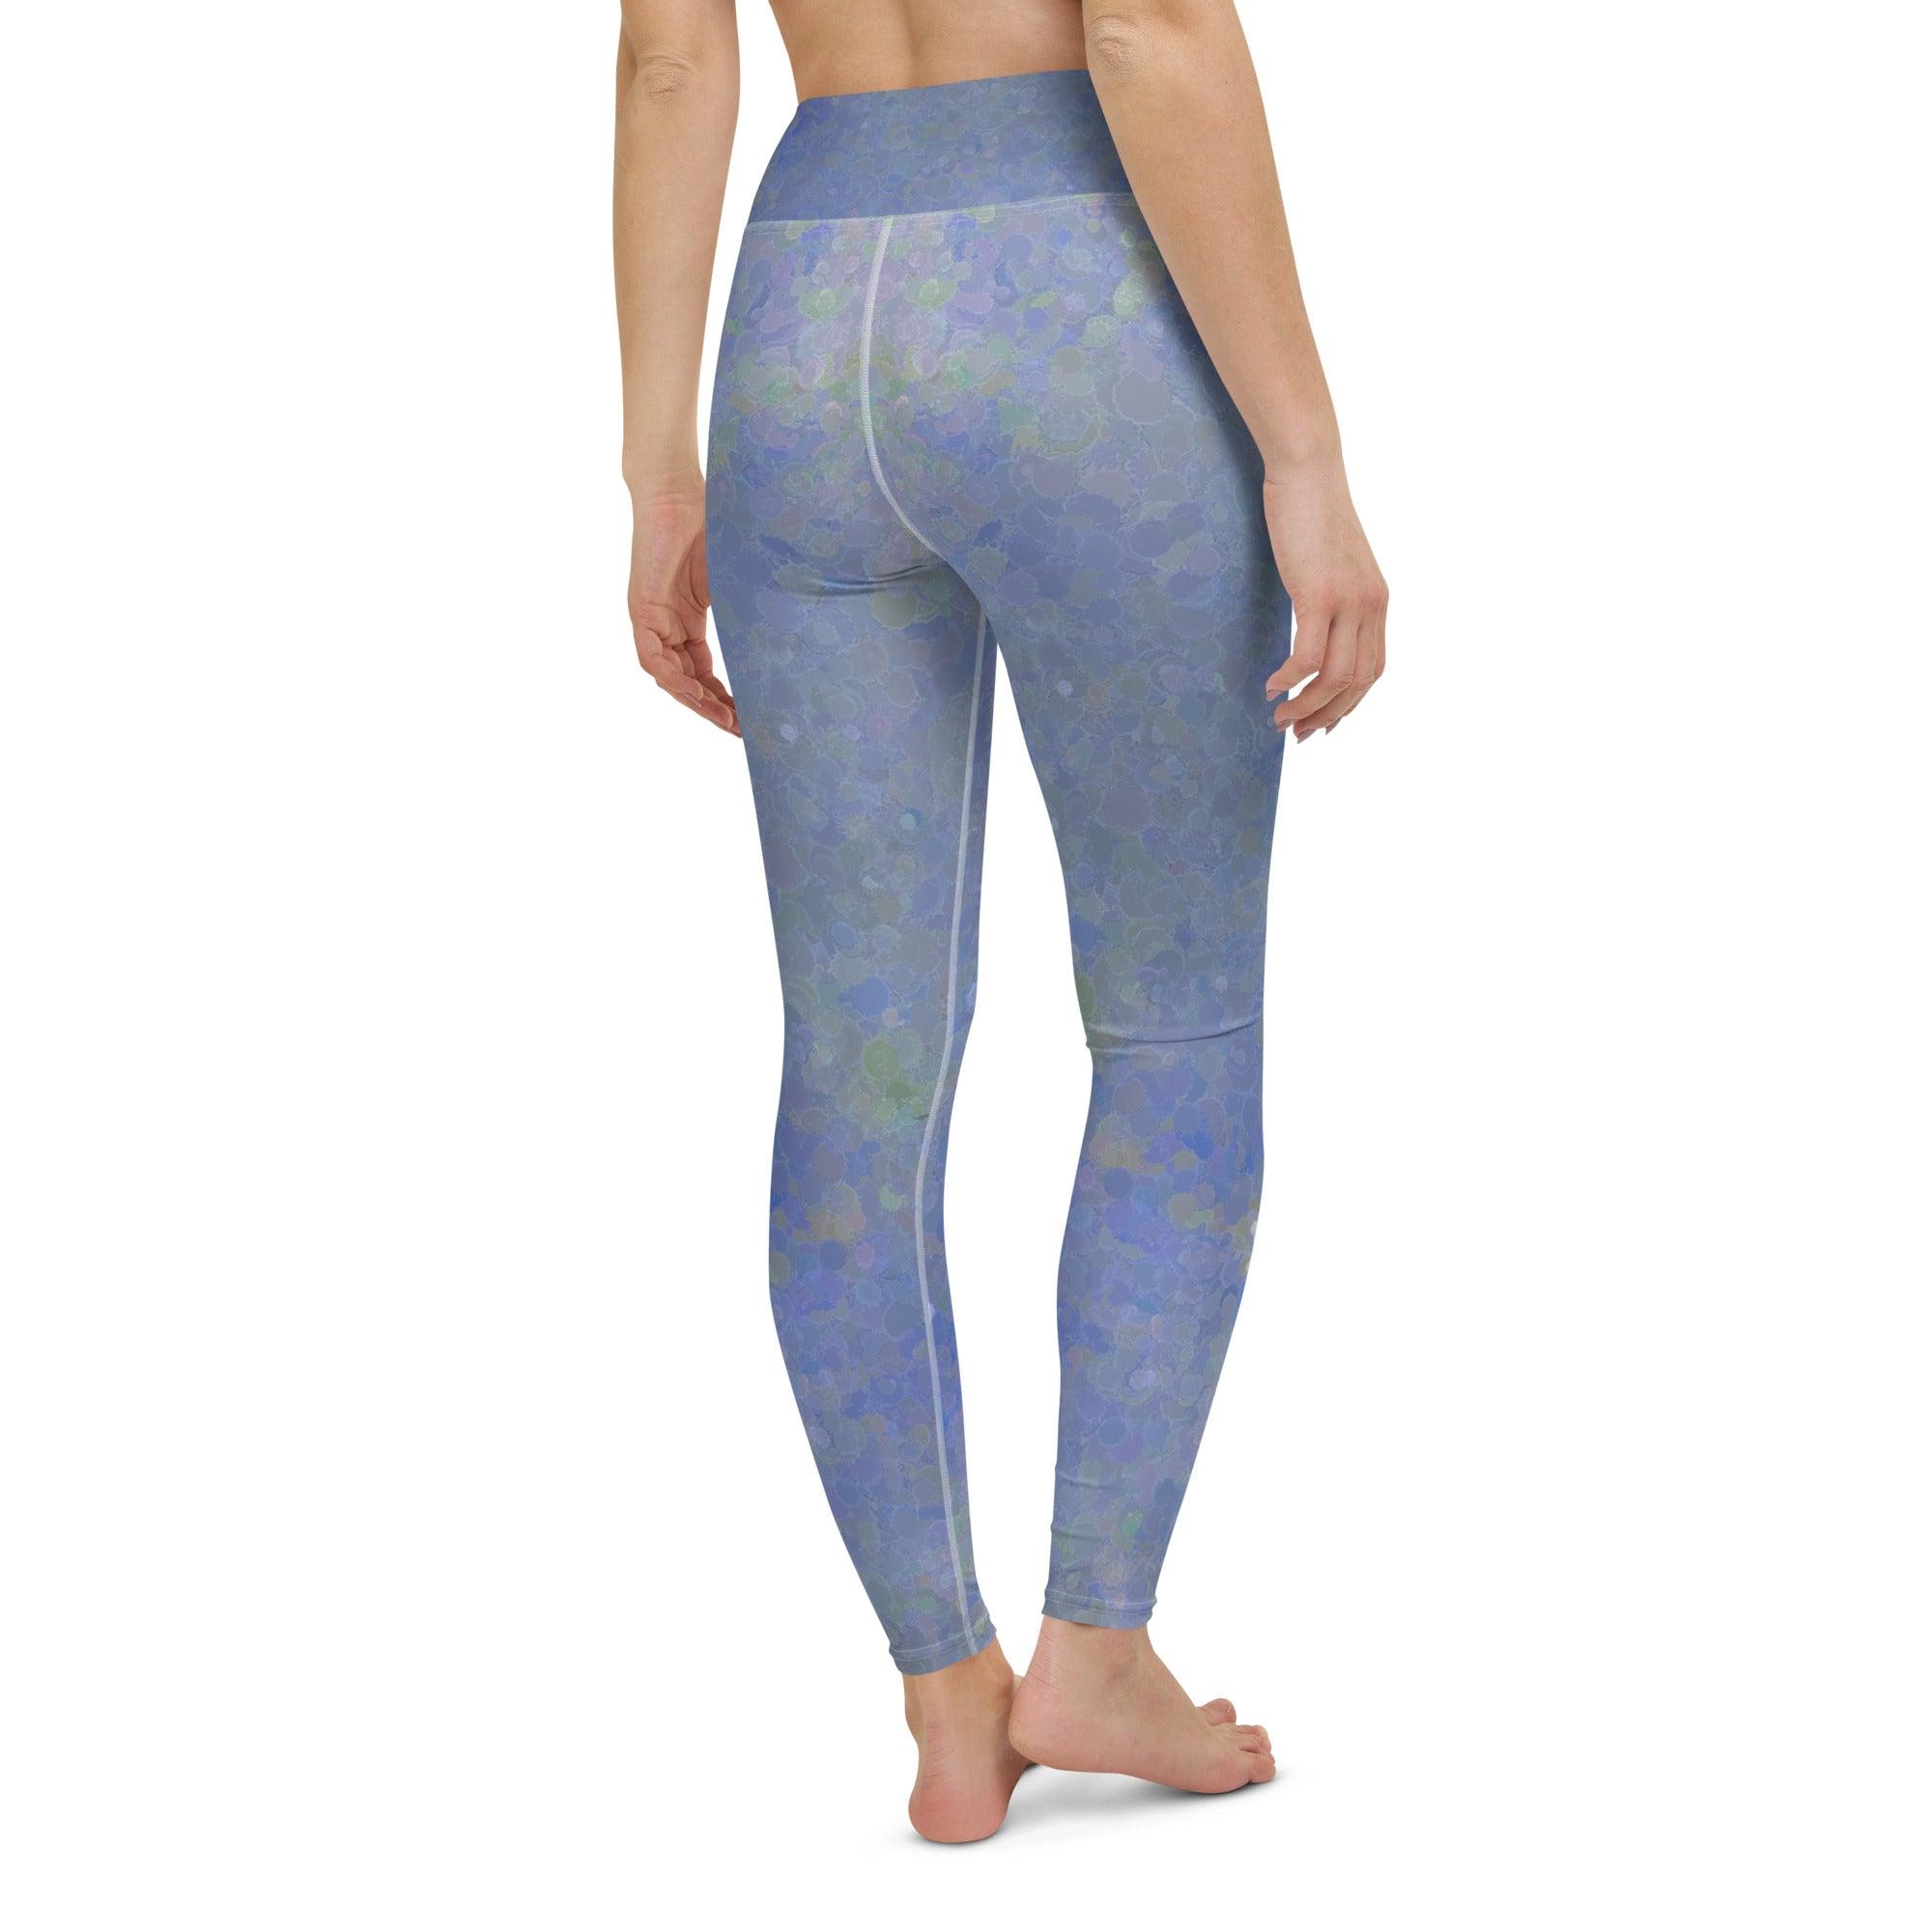 Versatile Glitter 1 Yoga Leggings for workout and casual wear.